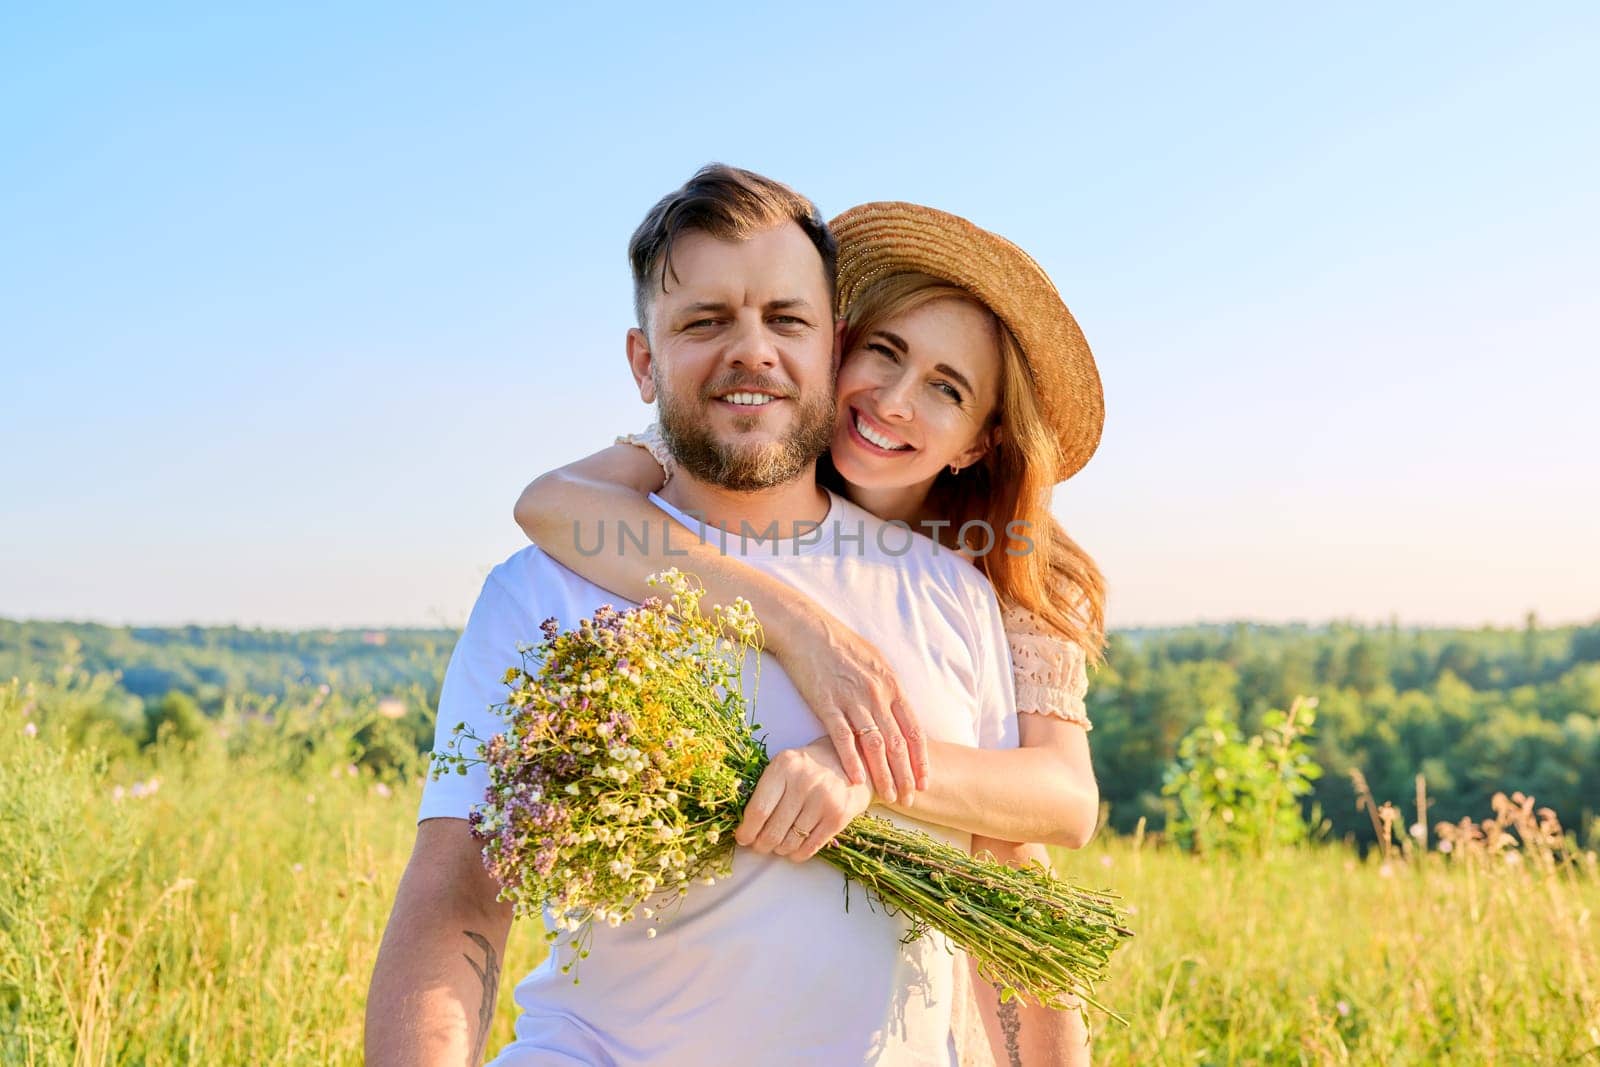 Happy middle-aged couple in love embracing, with bouquet of wildflowers, outdoors on summer nature meadow, looking at camera. Date, anniversary, family, wedding, celebration, relationship, 40s people